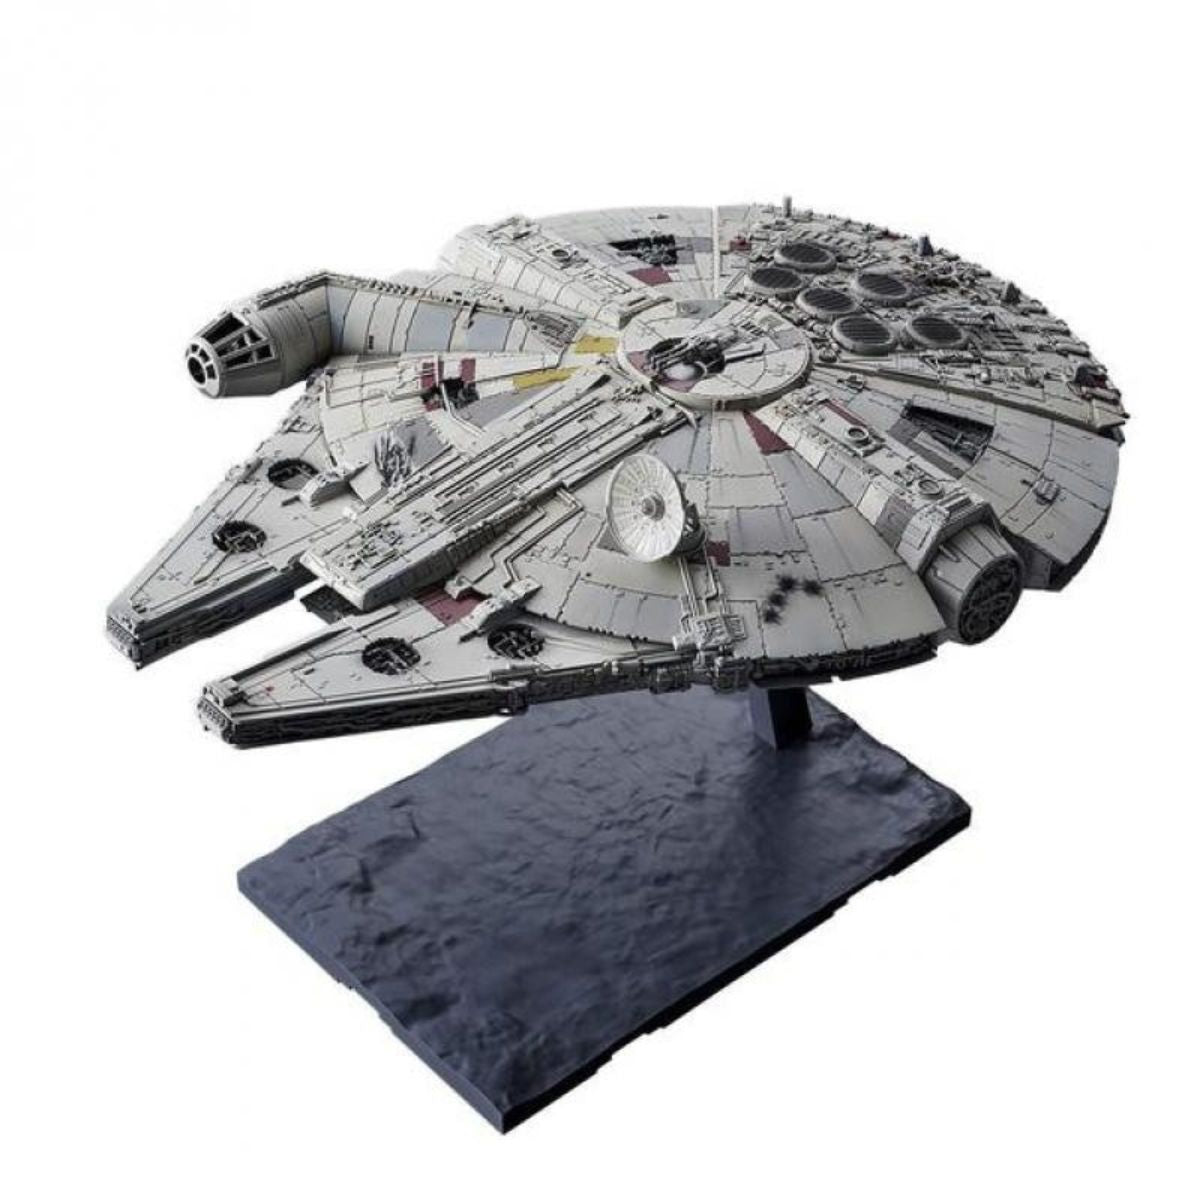 Millennium Falcon 1/144 (SW:The Rise Of Sky walker)-Bandai-Ace Cards & Collectibles